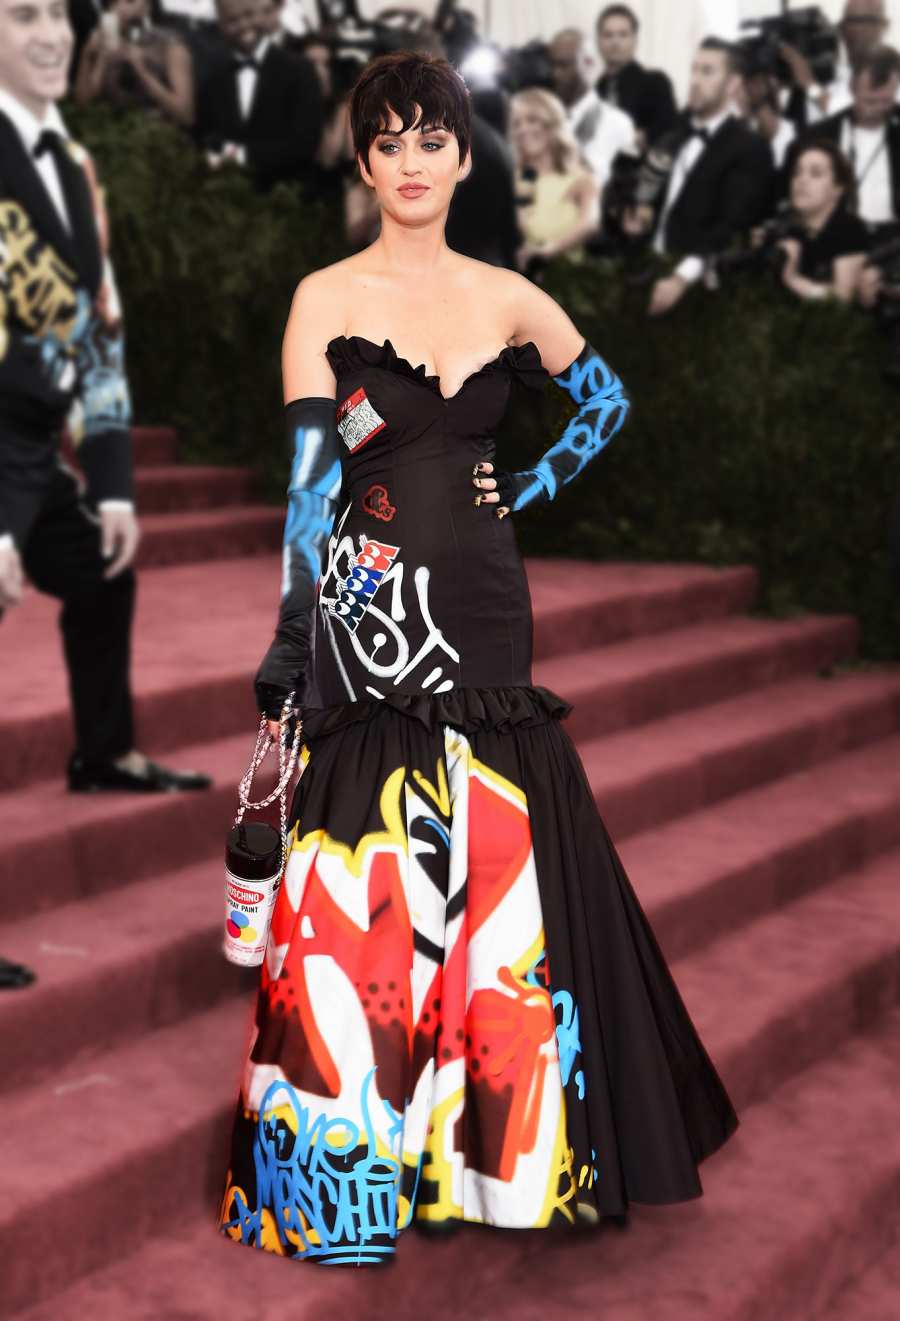 Katy Perry Wore Some of Her Wackiest Outfits Ever to the 2019 Met Gala